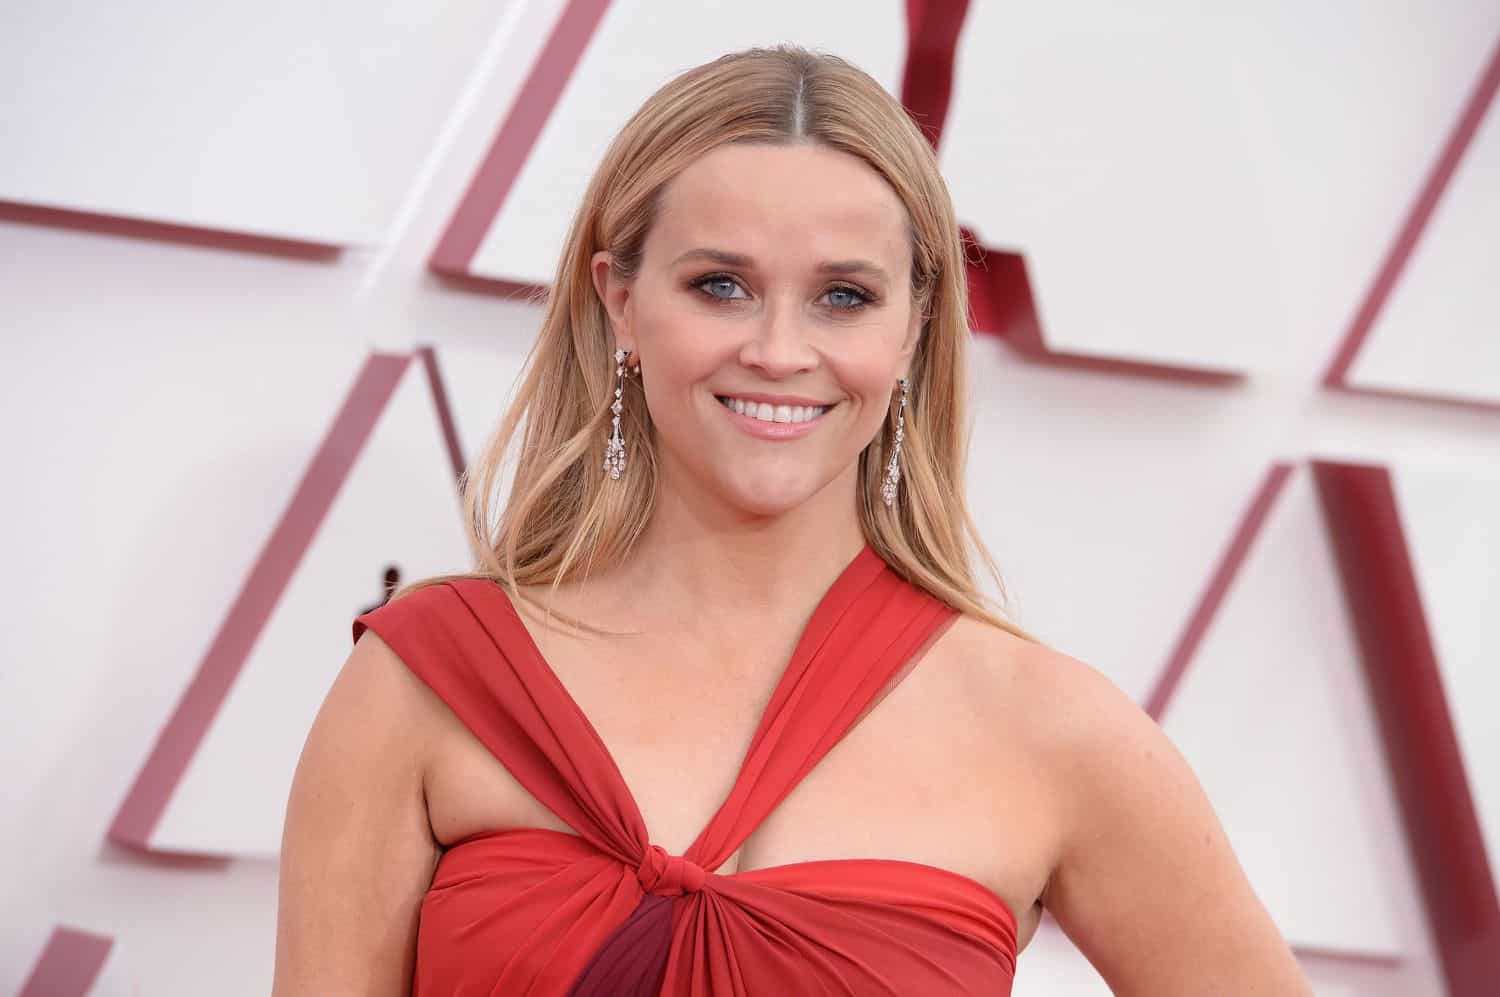 Reese Witherspoon – Age, Bio, Birthday, Family, Net Worth